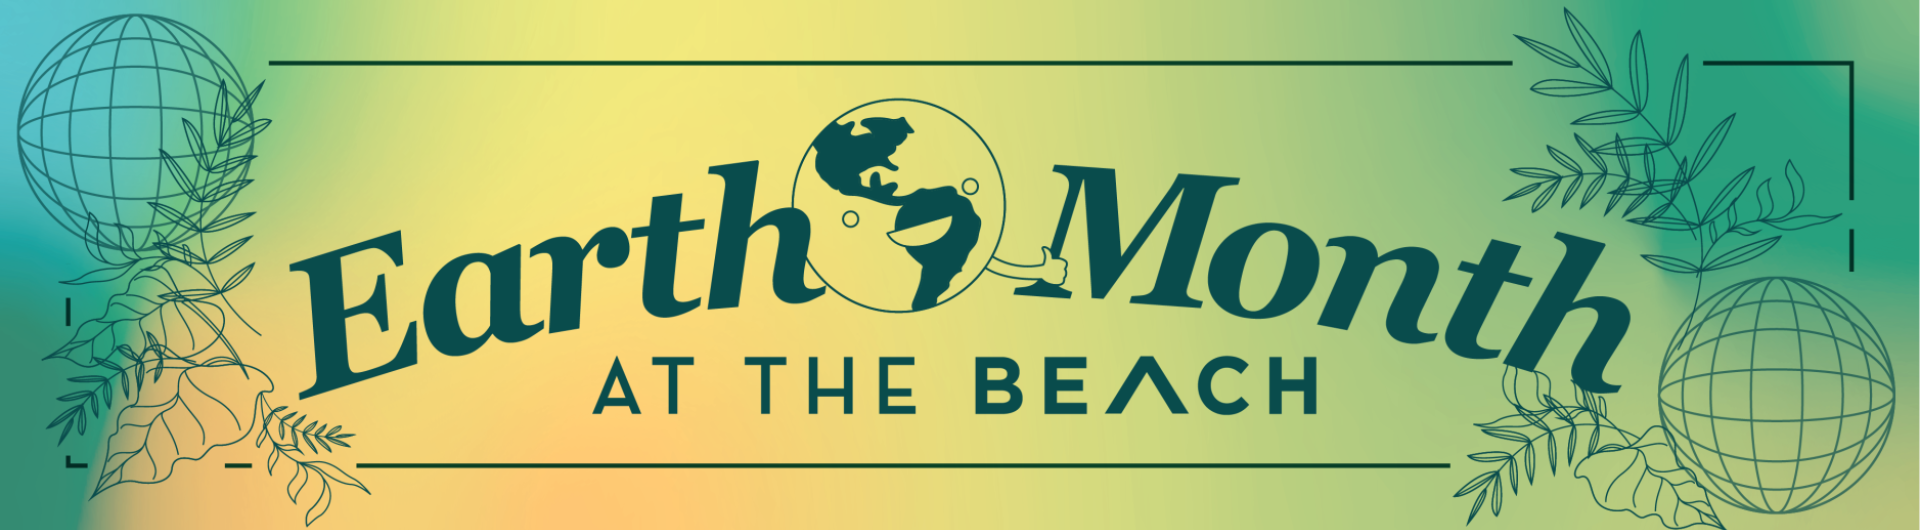 Earth Month at the Beach